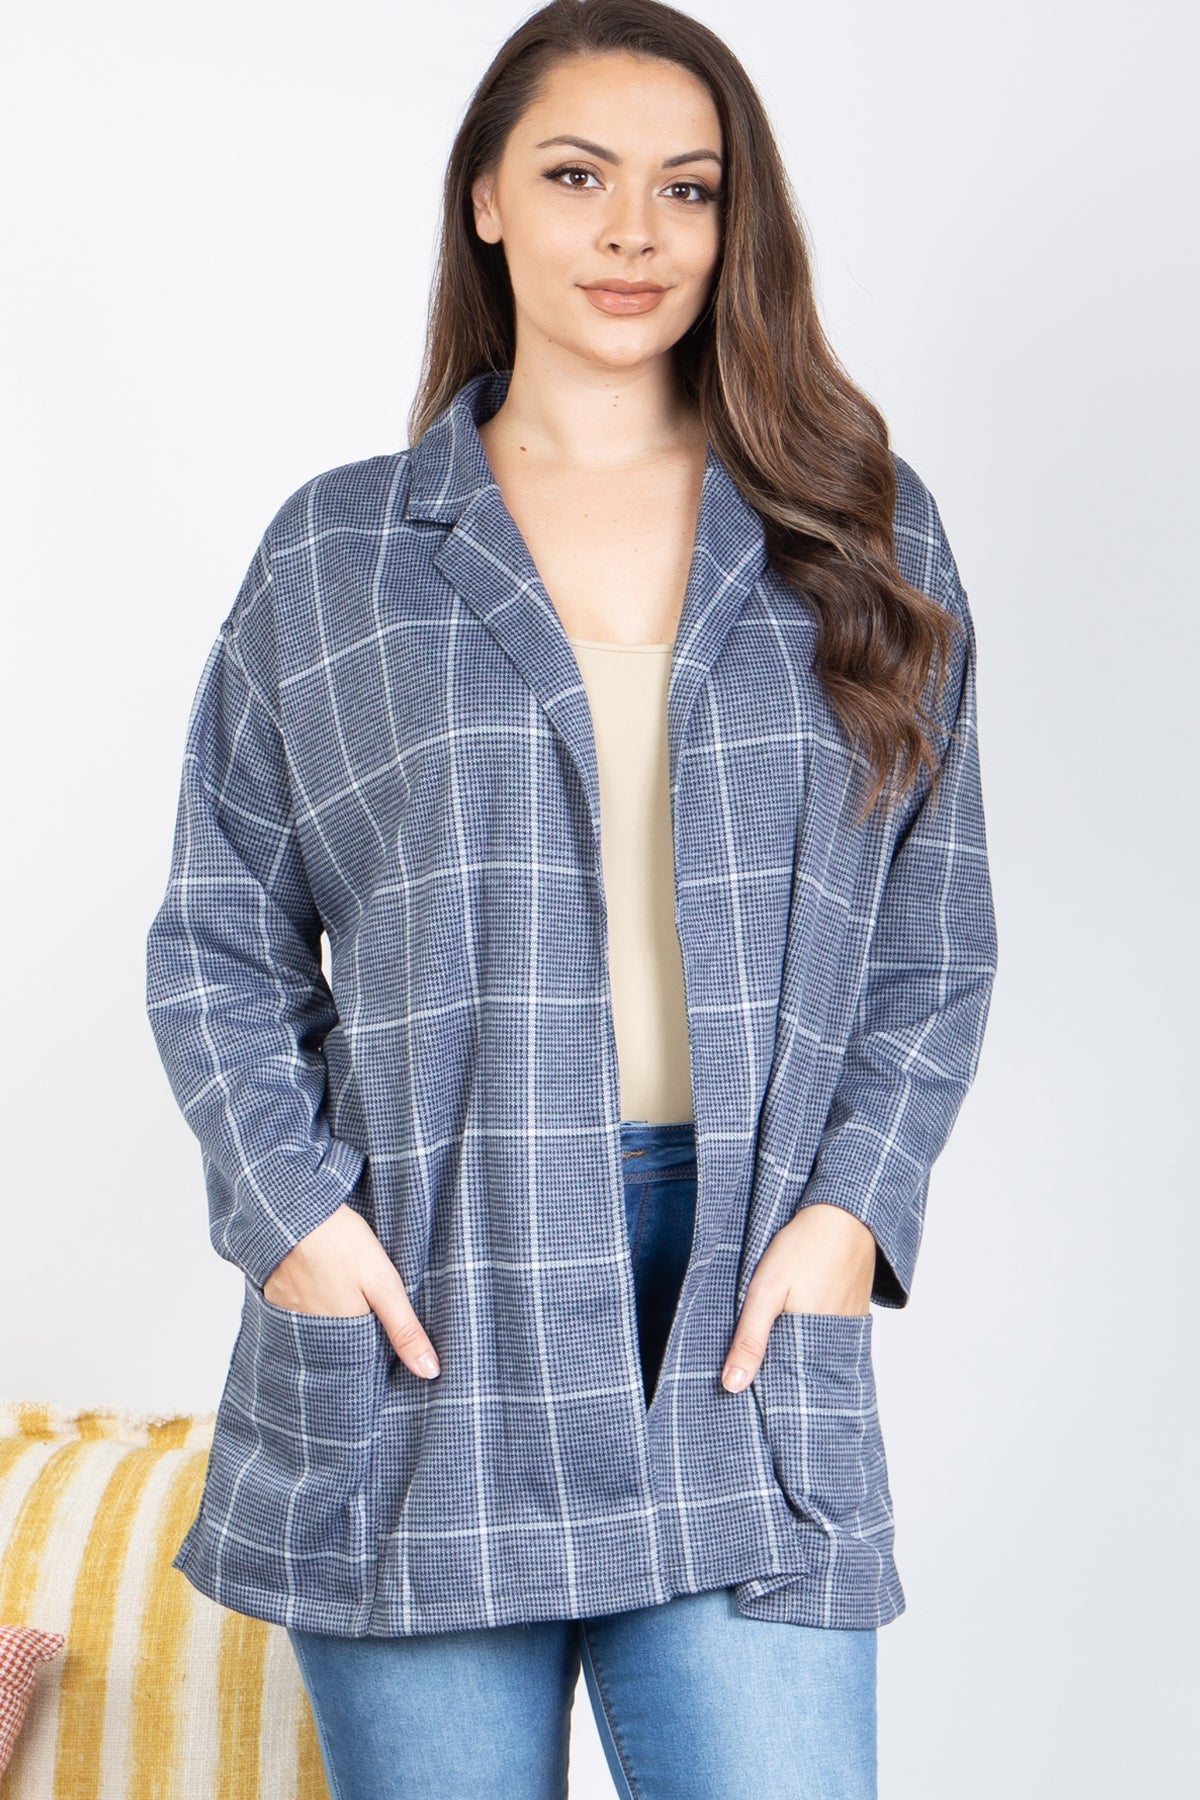 GREY PLAID OPEN FRONT JACKET